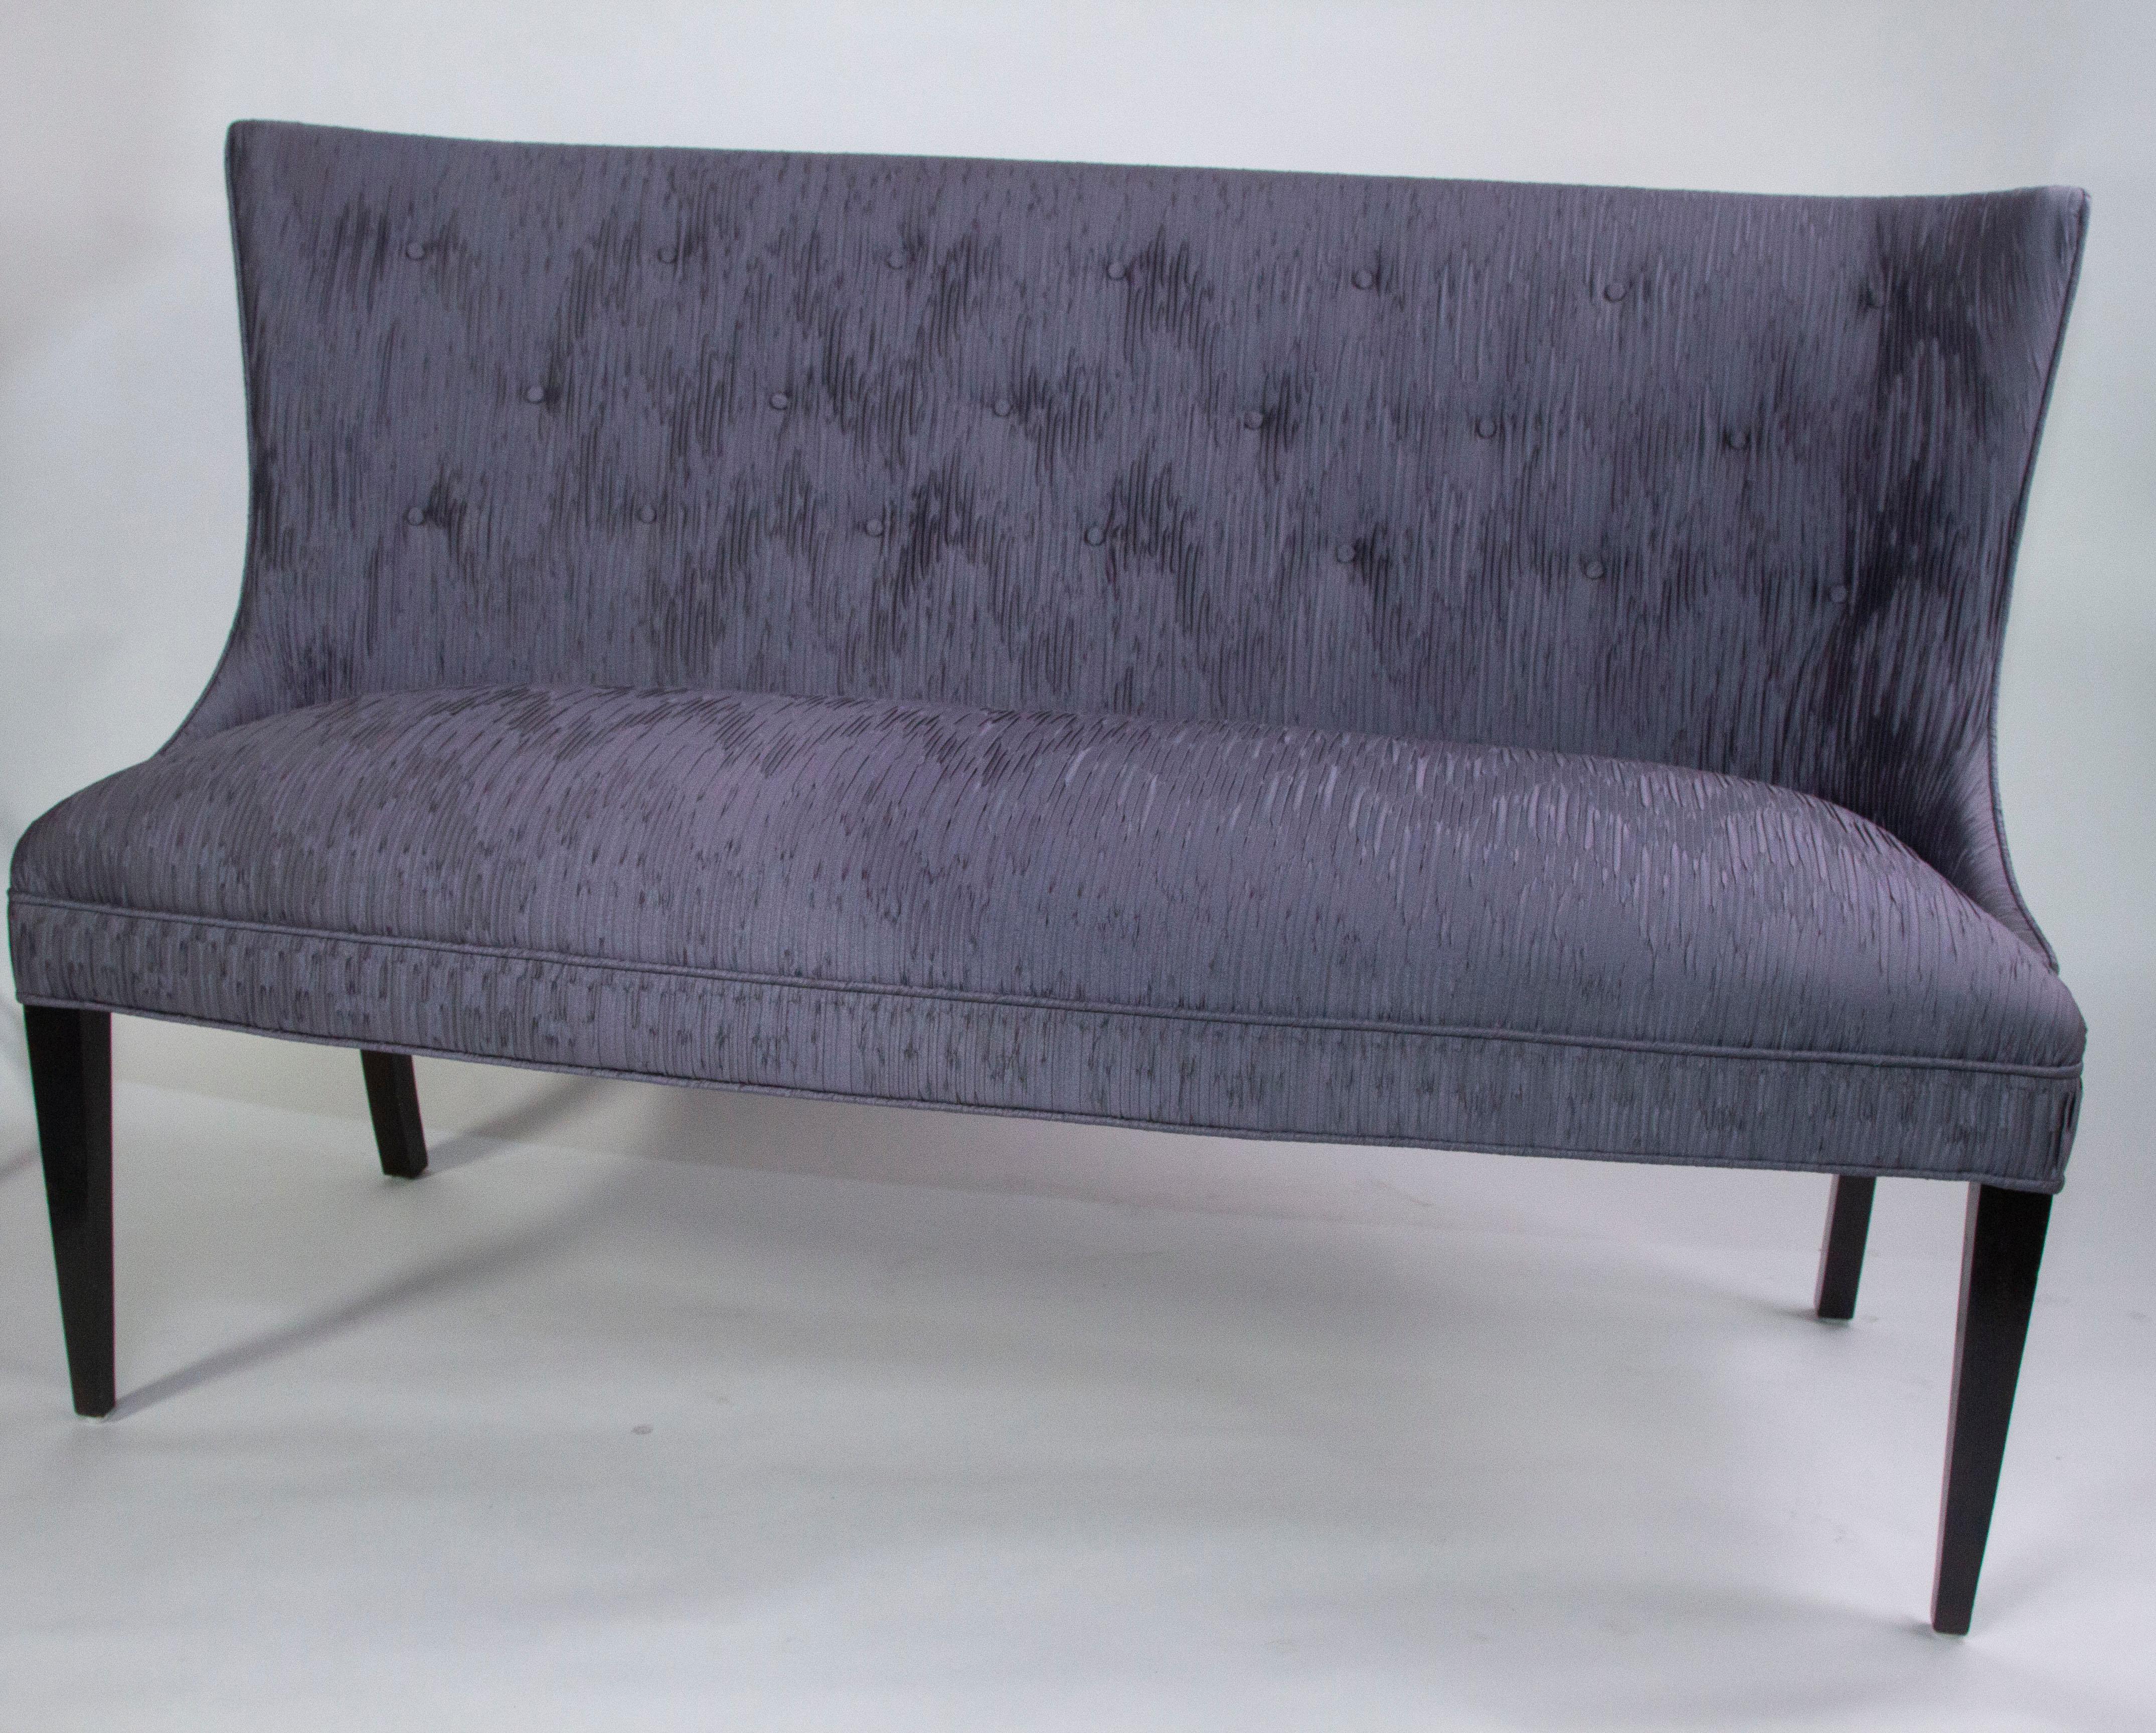 Oak French settee 1940's style with Tufted Back and Tapered Legs For Sale